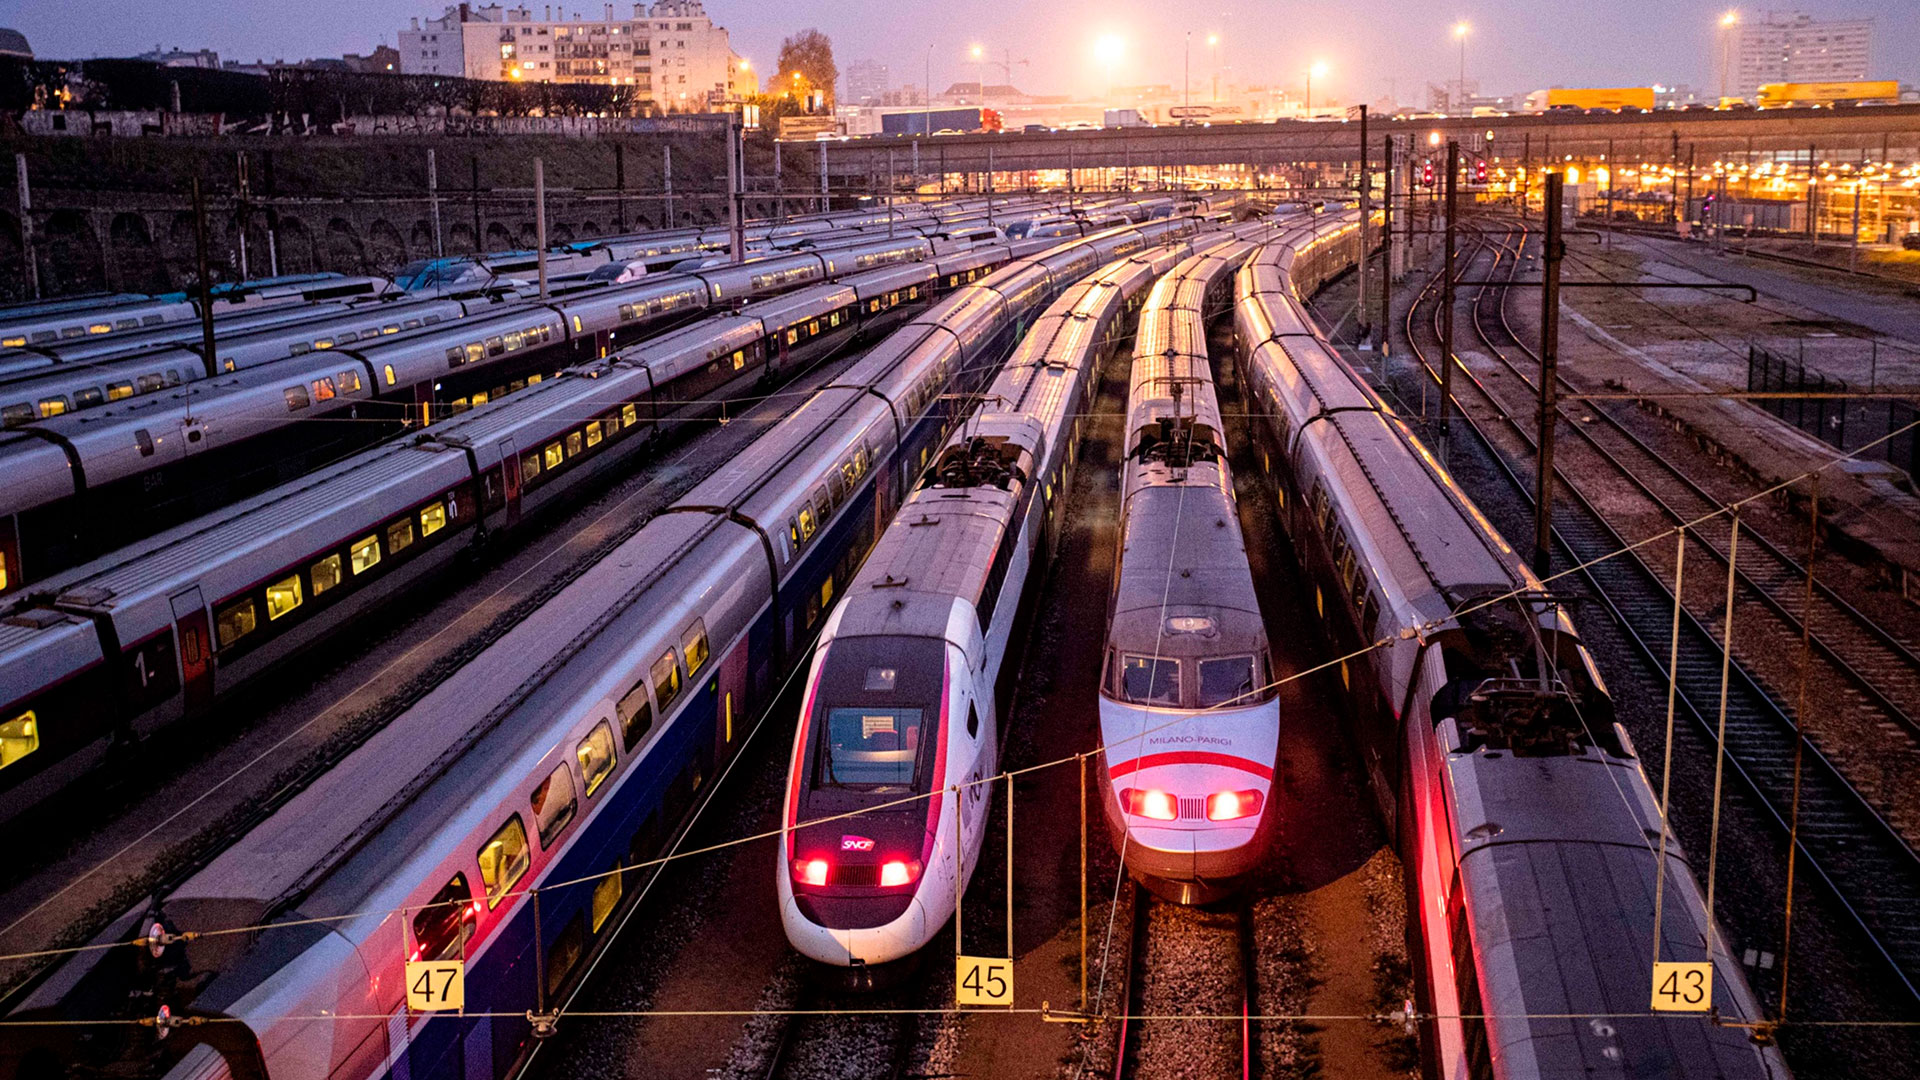 TGV high speed trains sit outside a station during a national strike in Charenton near Paris, France, on Thursday, Dec. 5, 2019. In what has been the undoing of previous French governments, unions representing everyone from transport workers to lawyers, doctors, teachers and students are going on an indefinite “greve,” or strike, starting Thursday to oppose Macron’s plan to reform the country’s pension system. Photographer: Christophe Morin/Bloomberg